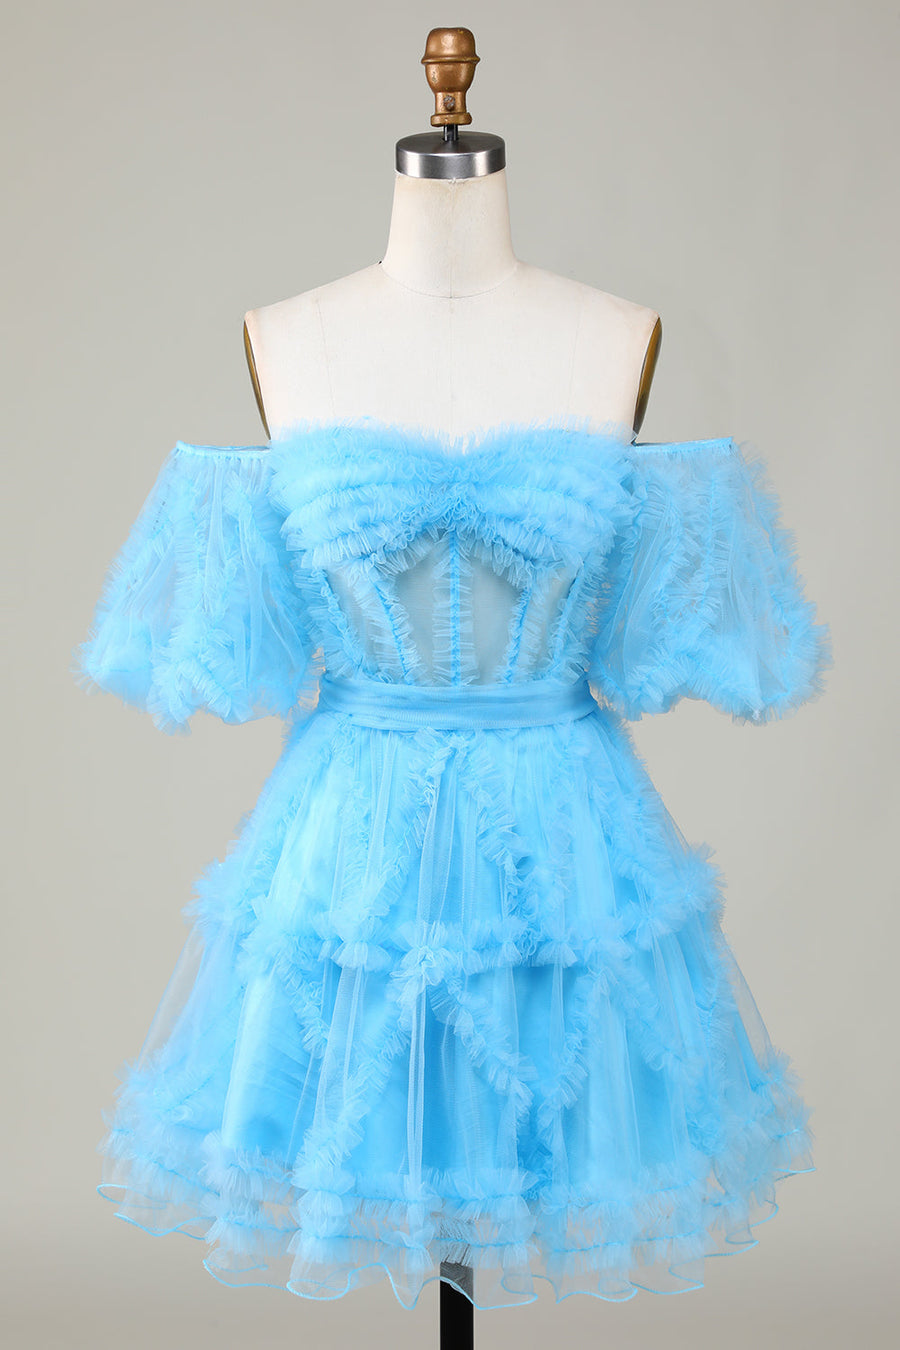 Sky Blue A-line Off-the-Shoulder Ruffled Puff Sleeves Homecoming Dress